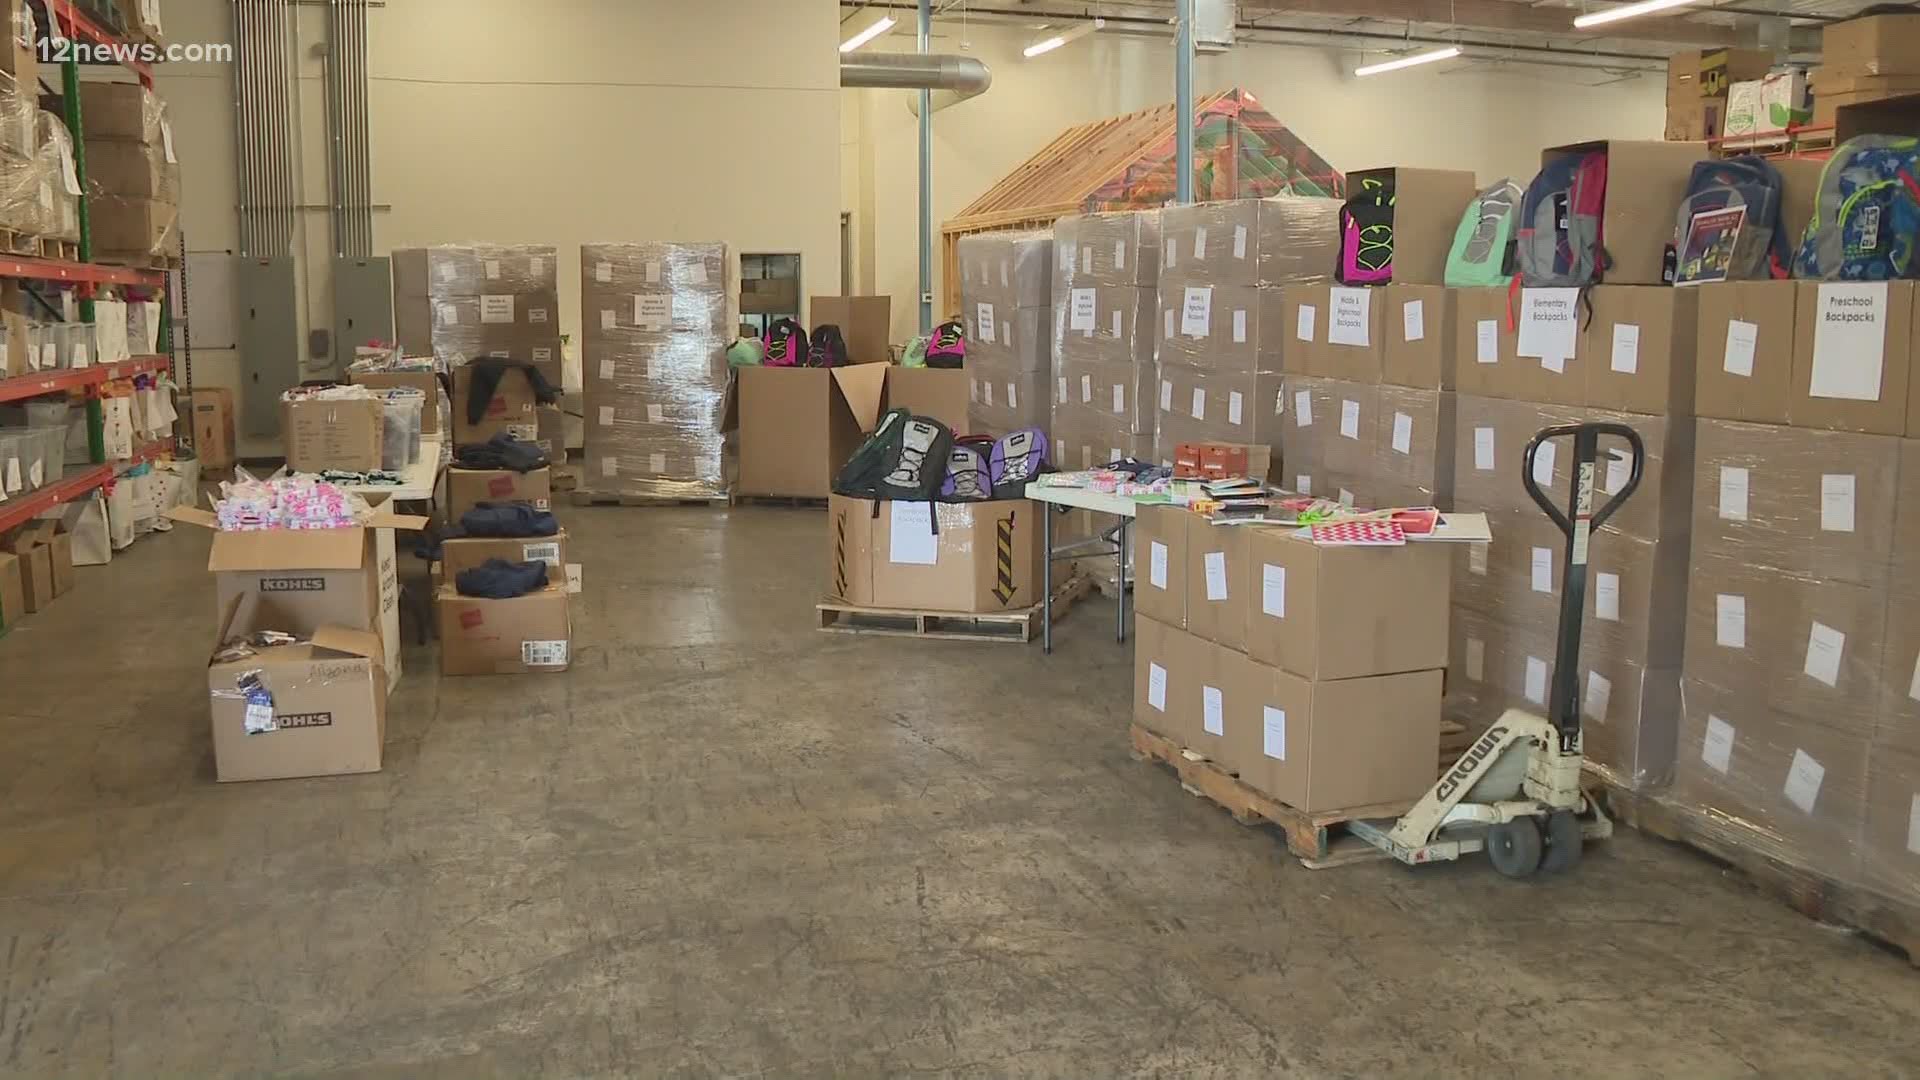 Arizona Helping Hands, which helps out foster families, is asking for donations for students ahead of the new school year.